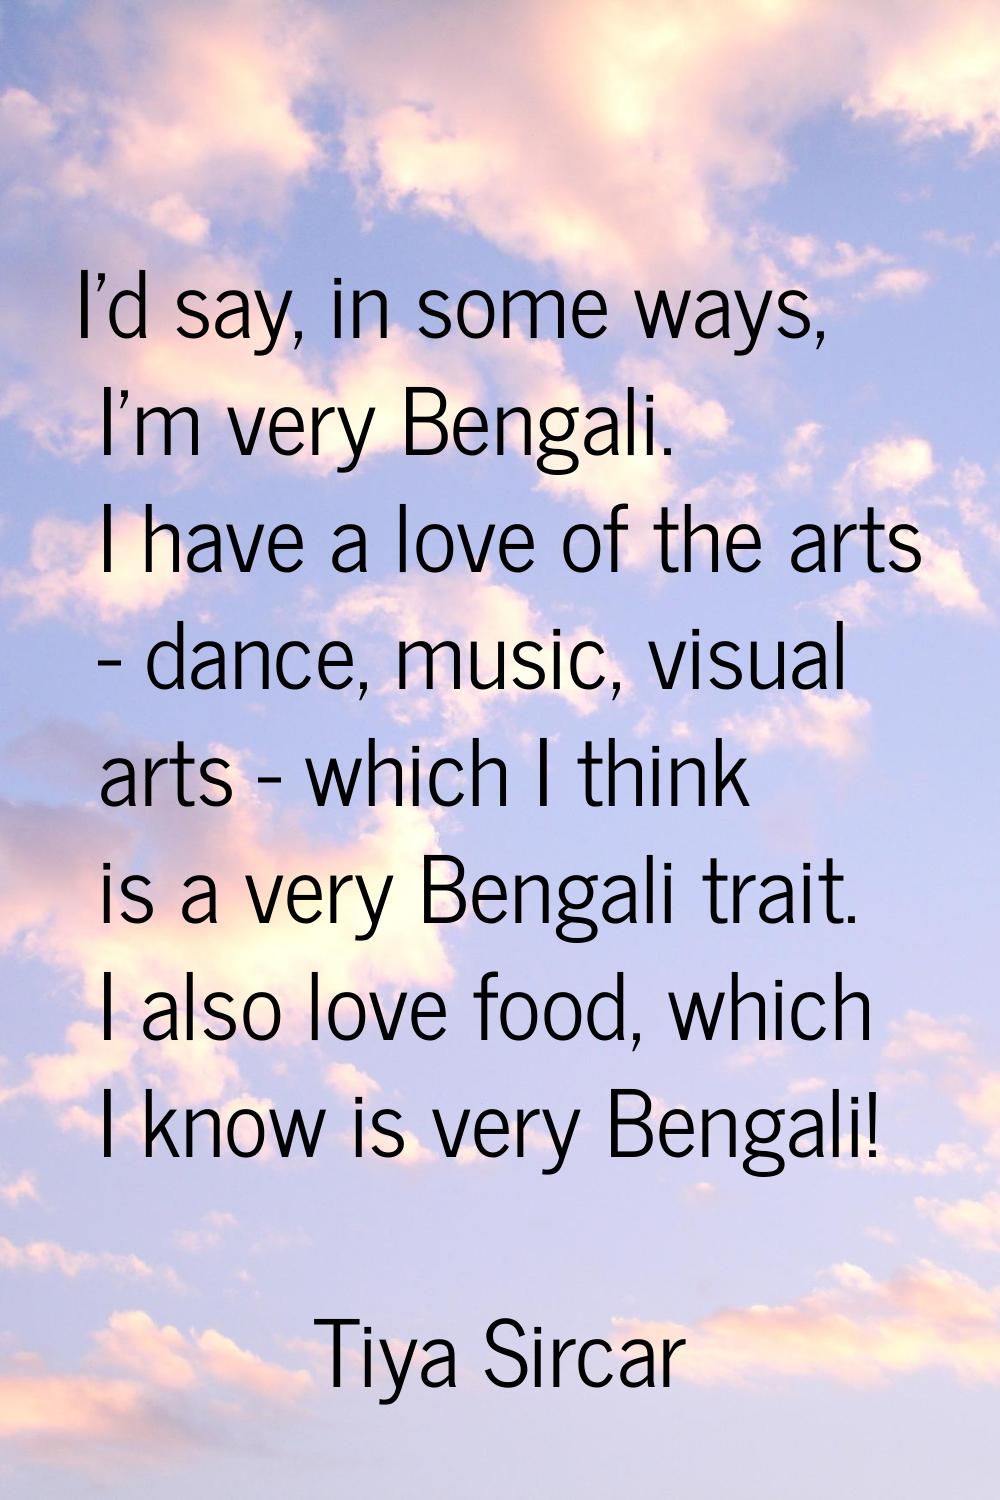 I'd say, in some ways, I'm very Bengali. I have a love of the arts - dance, music, visual arts - wh